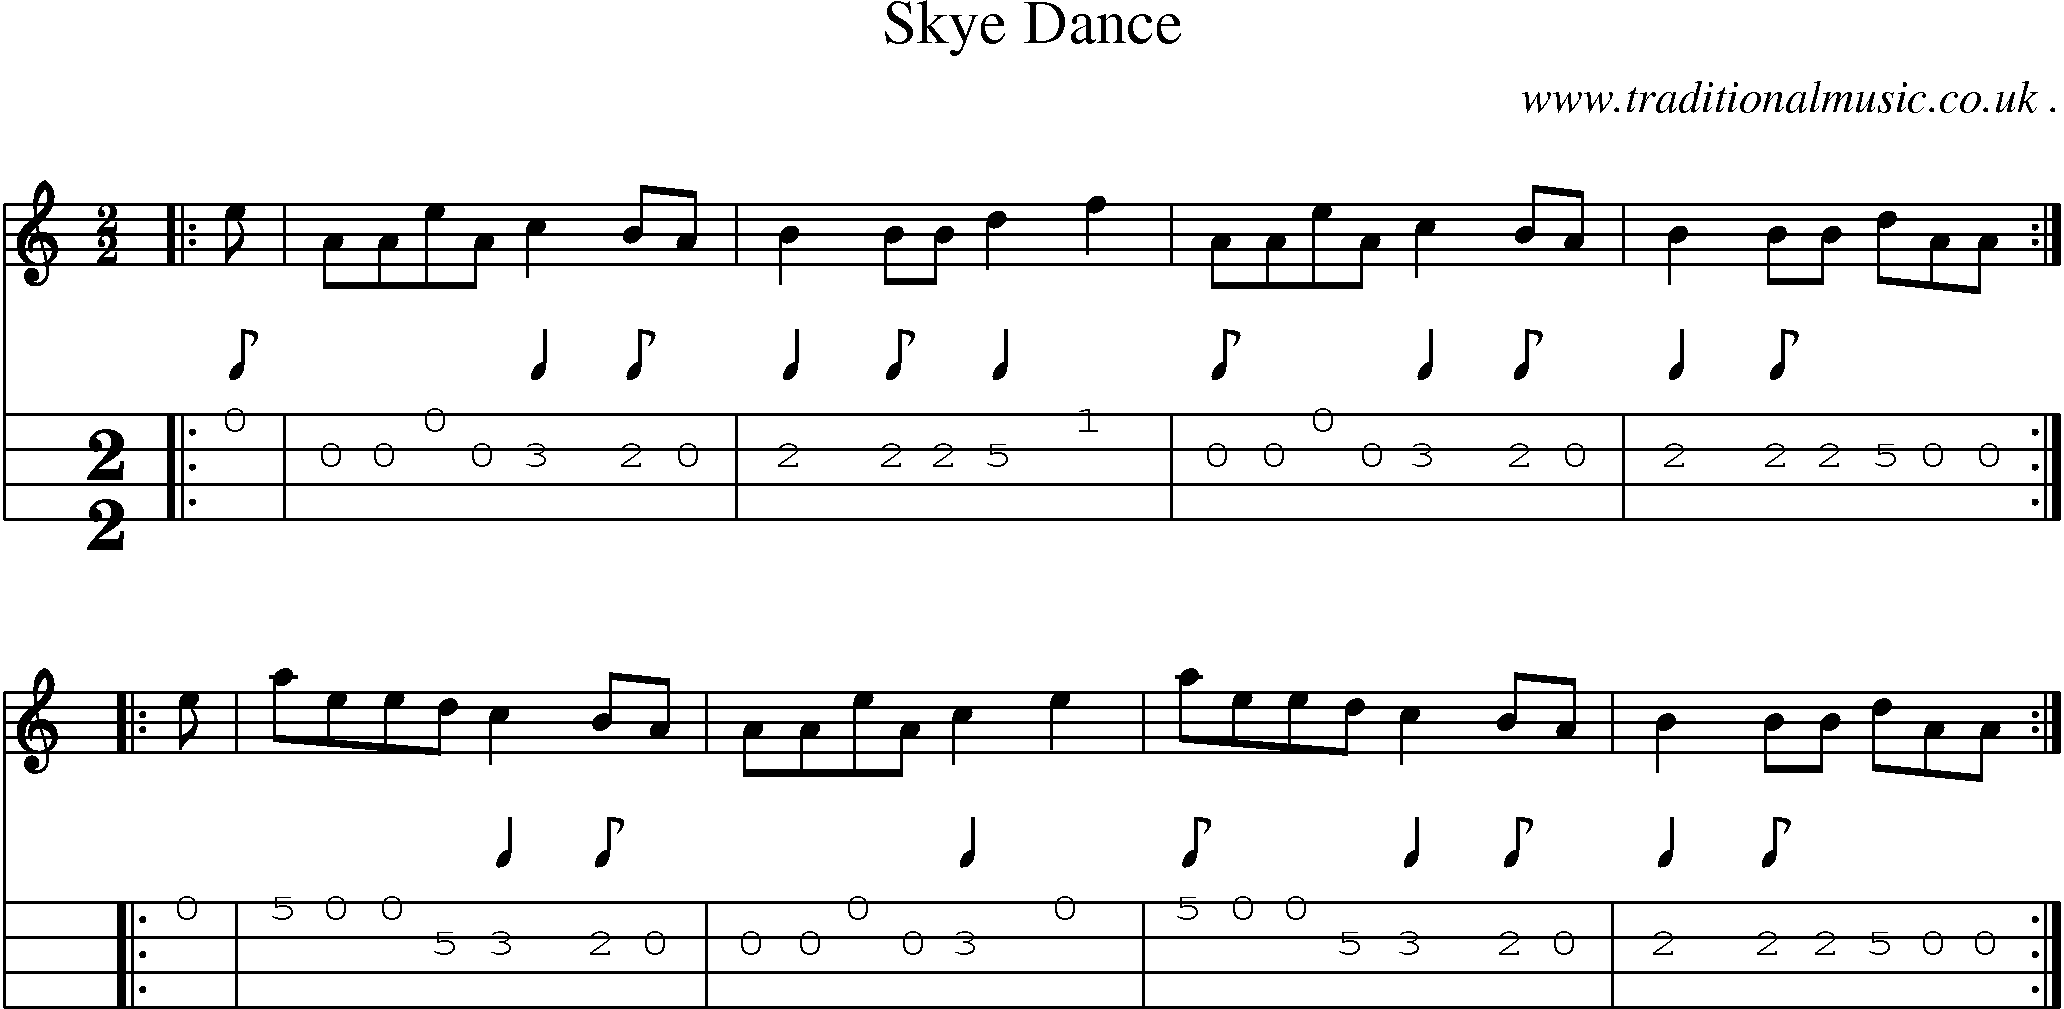 Sheet-music  score, Chords and Mandolin Tabs for Skye Dance